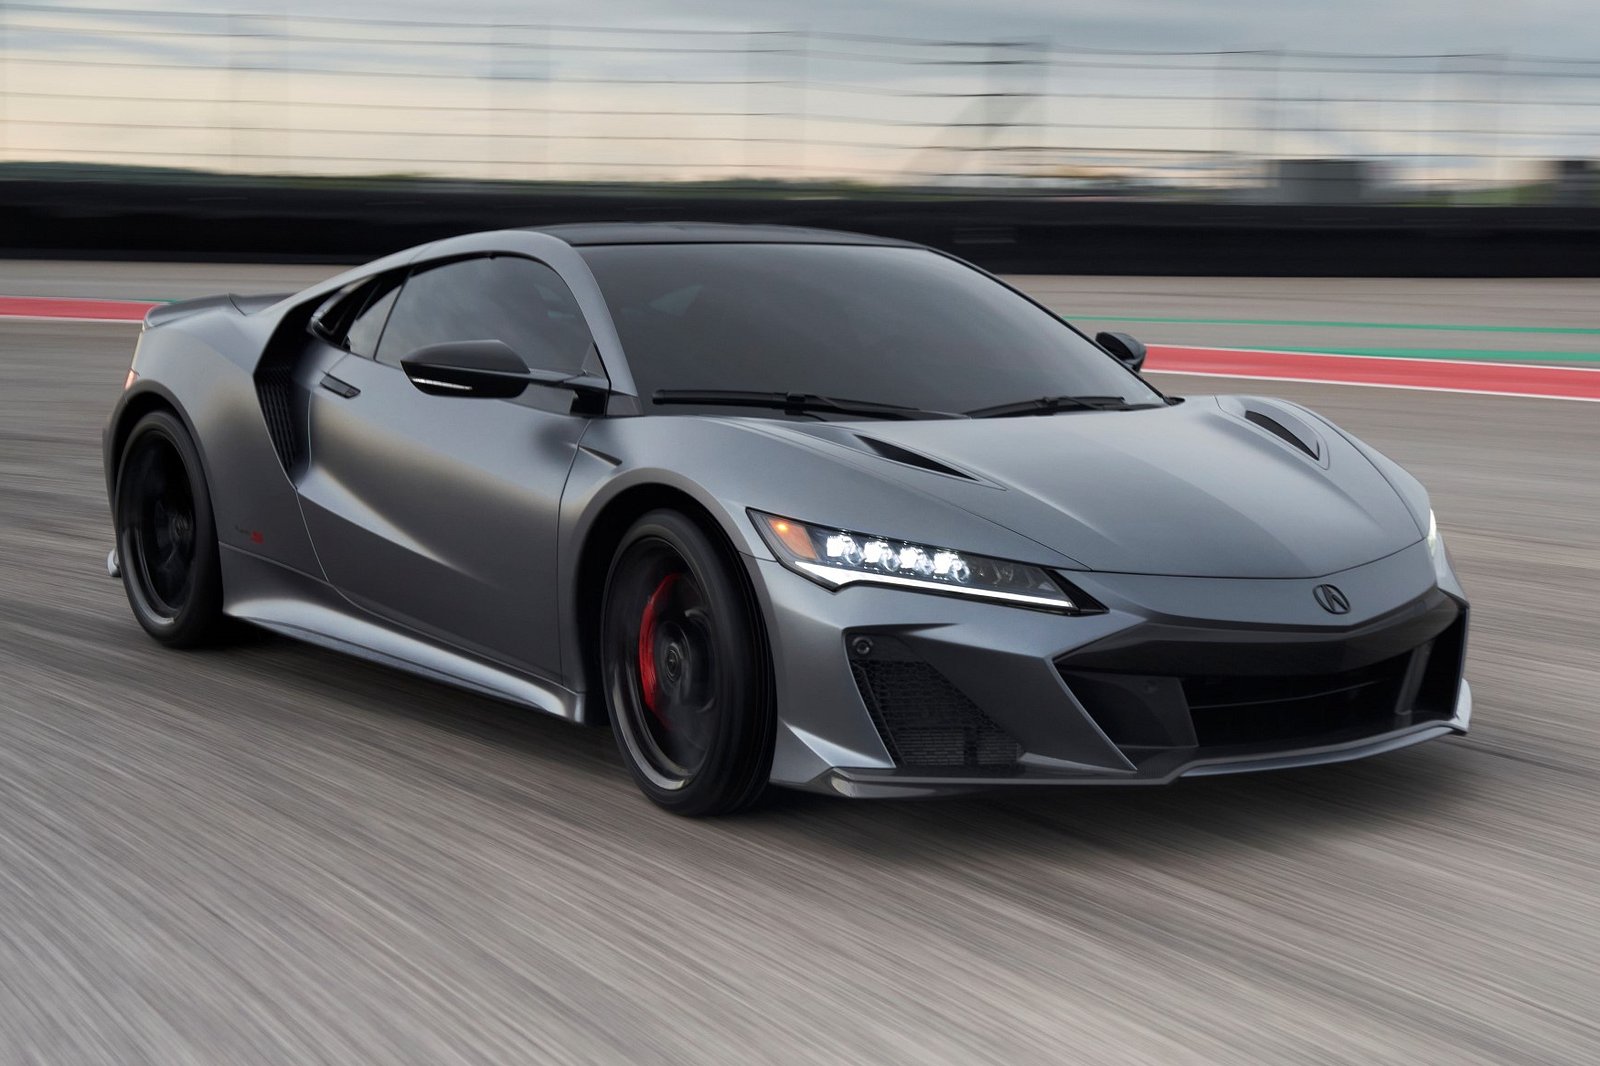 sports cars, honda civic type r-gt to replace acura nsx as honda's top-flight racer